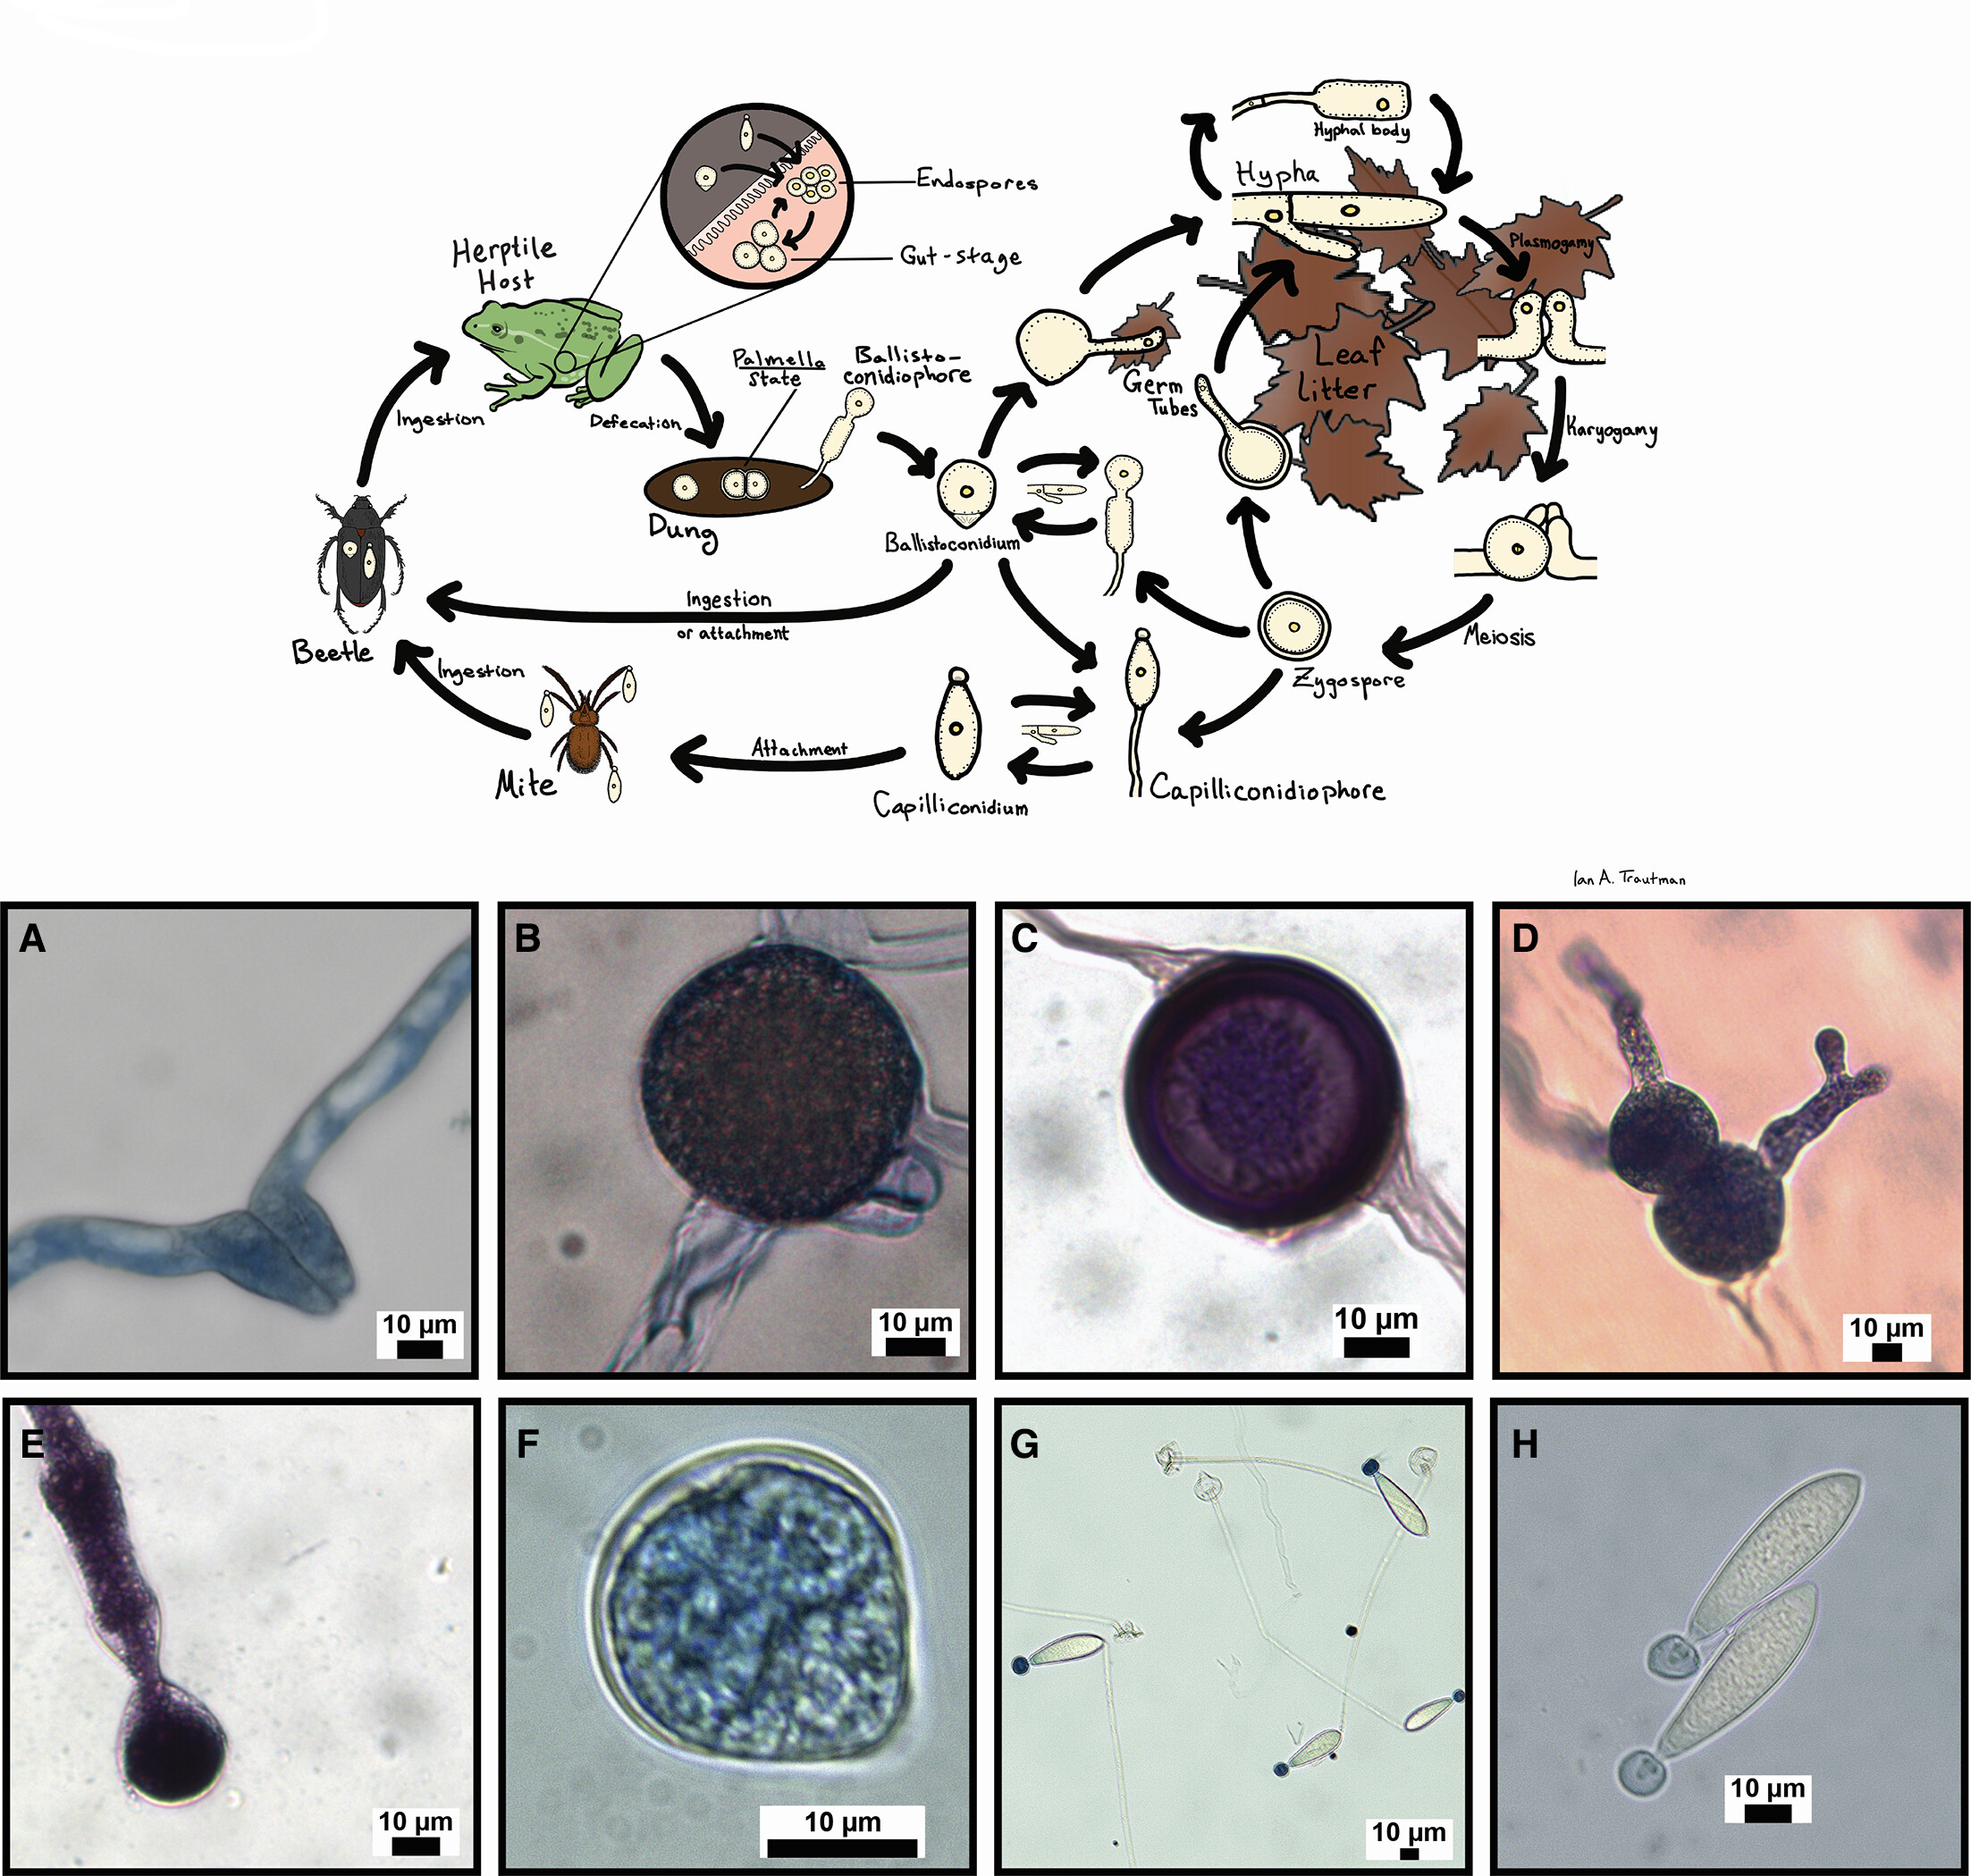 Herptile gut microbiomes: a natural system to study multi-kingdom interactions between filamentous fungi and bacteria.